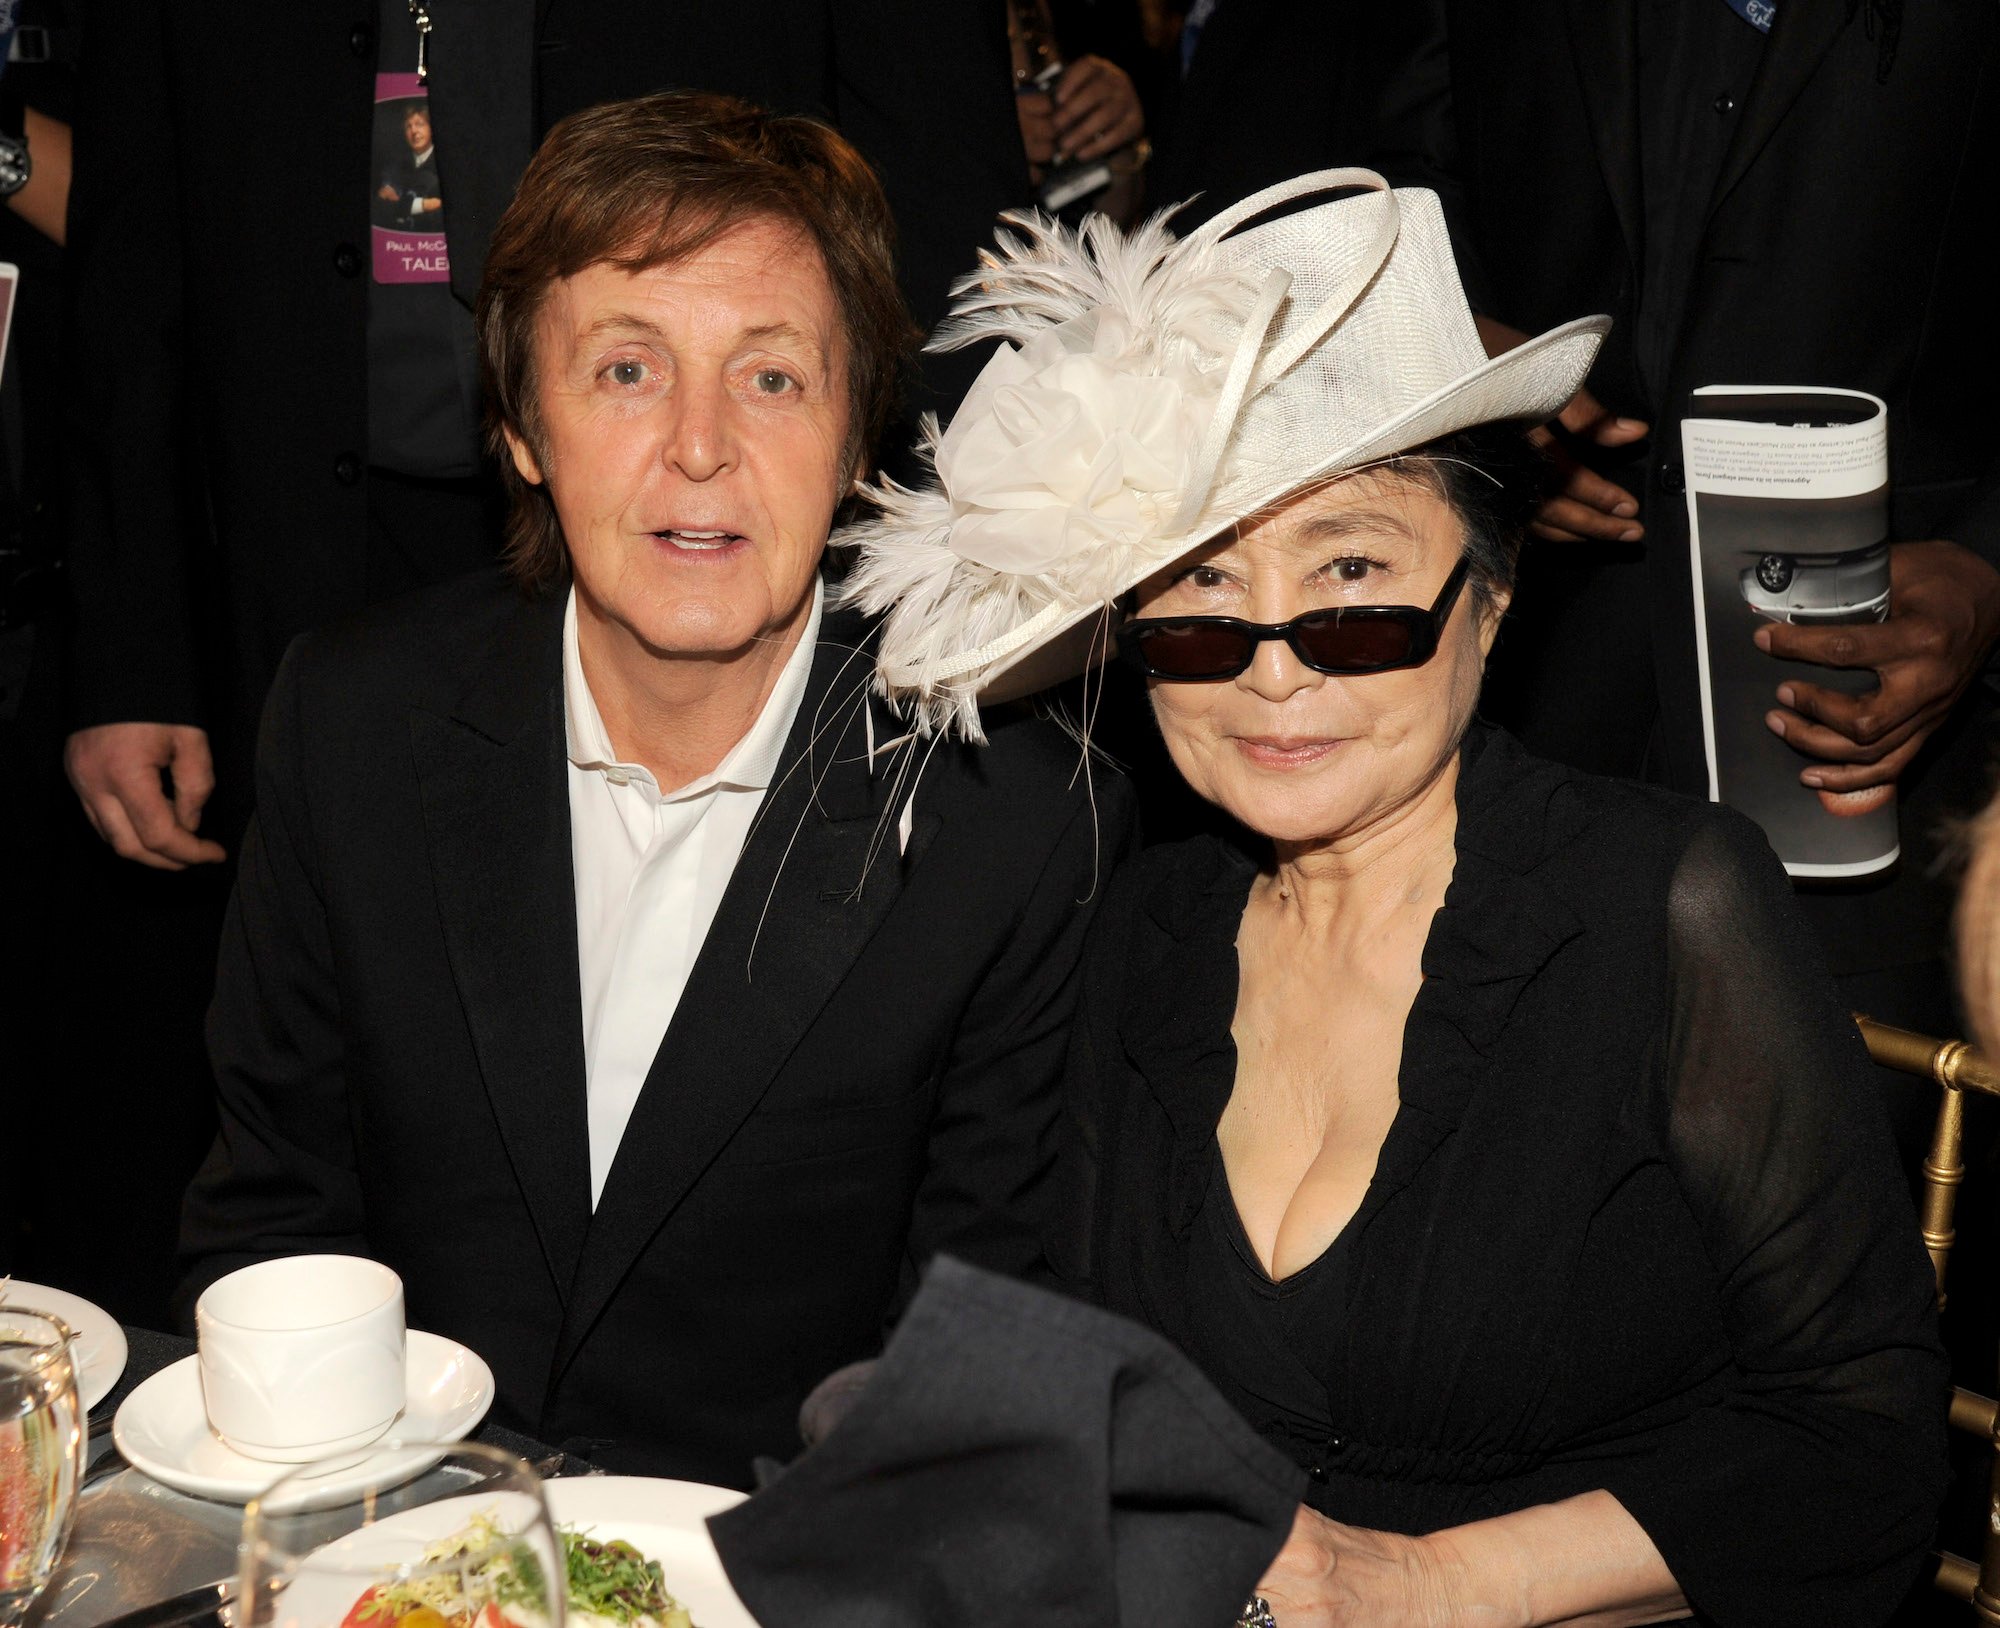 Paul McCartney and Yoko Ono sit together at the 2012 MusiCares gala honoring the Beatles singer/songwriter